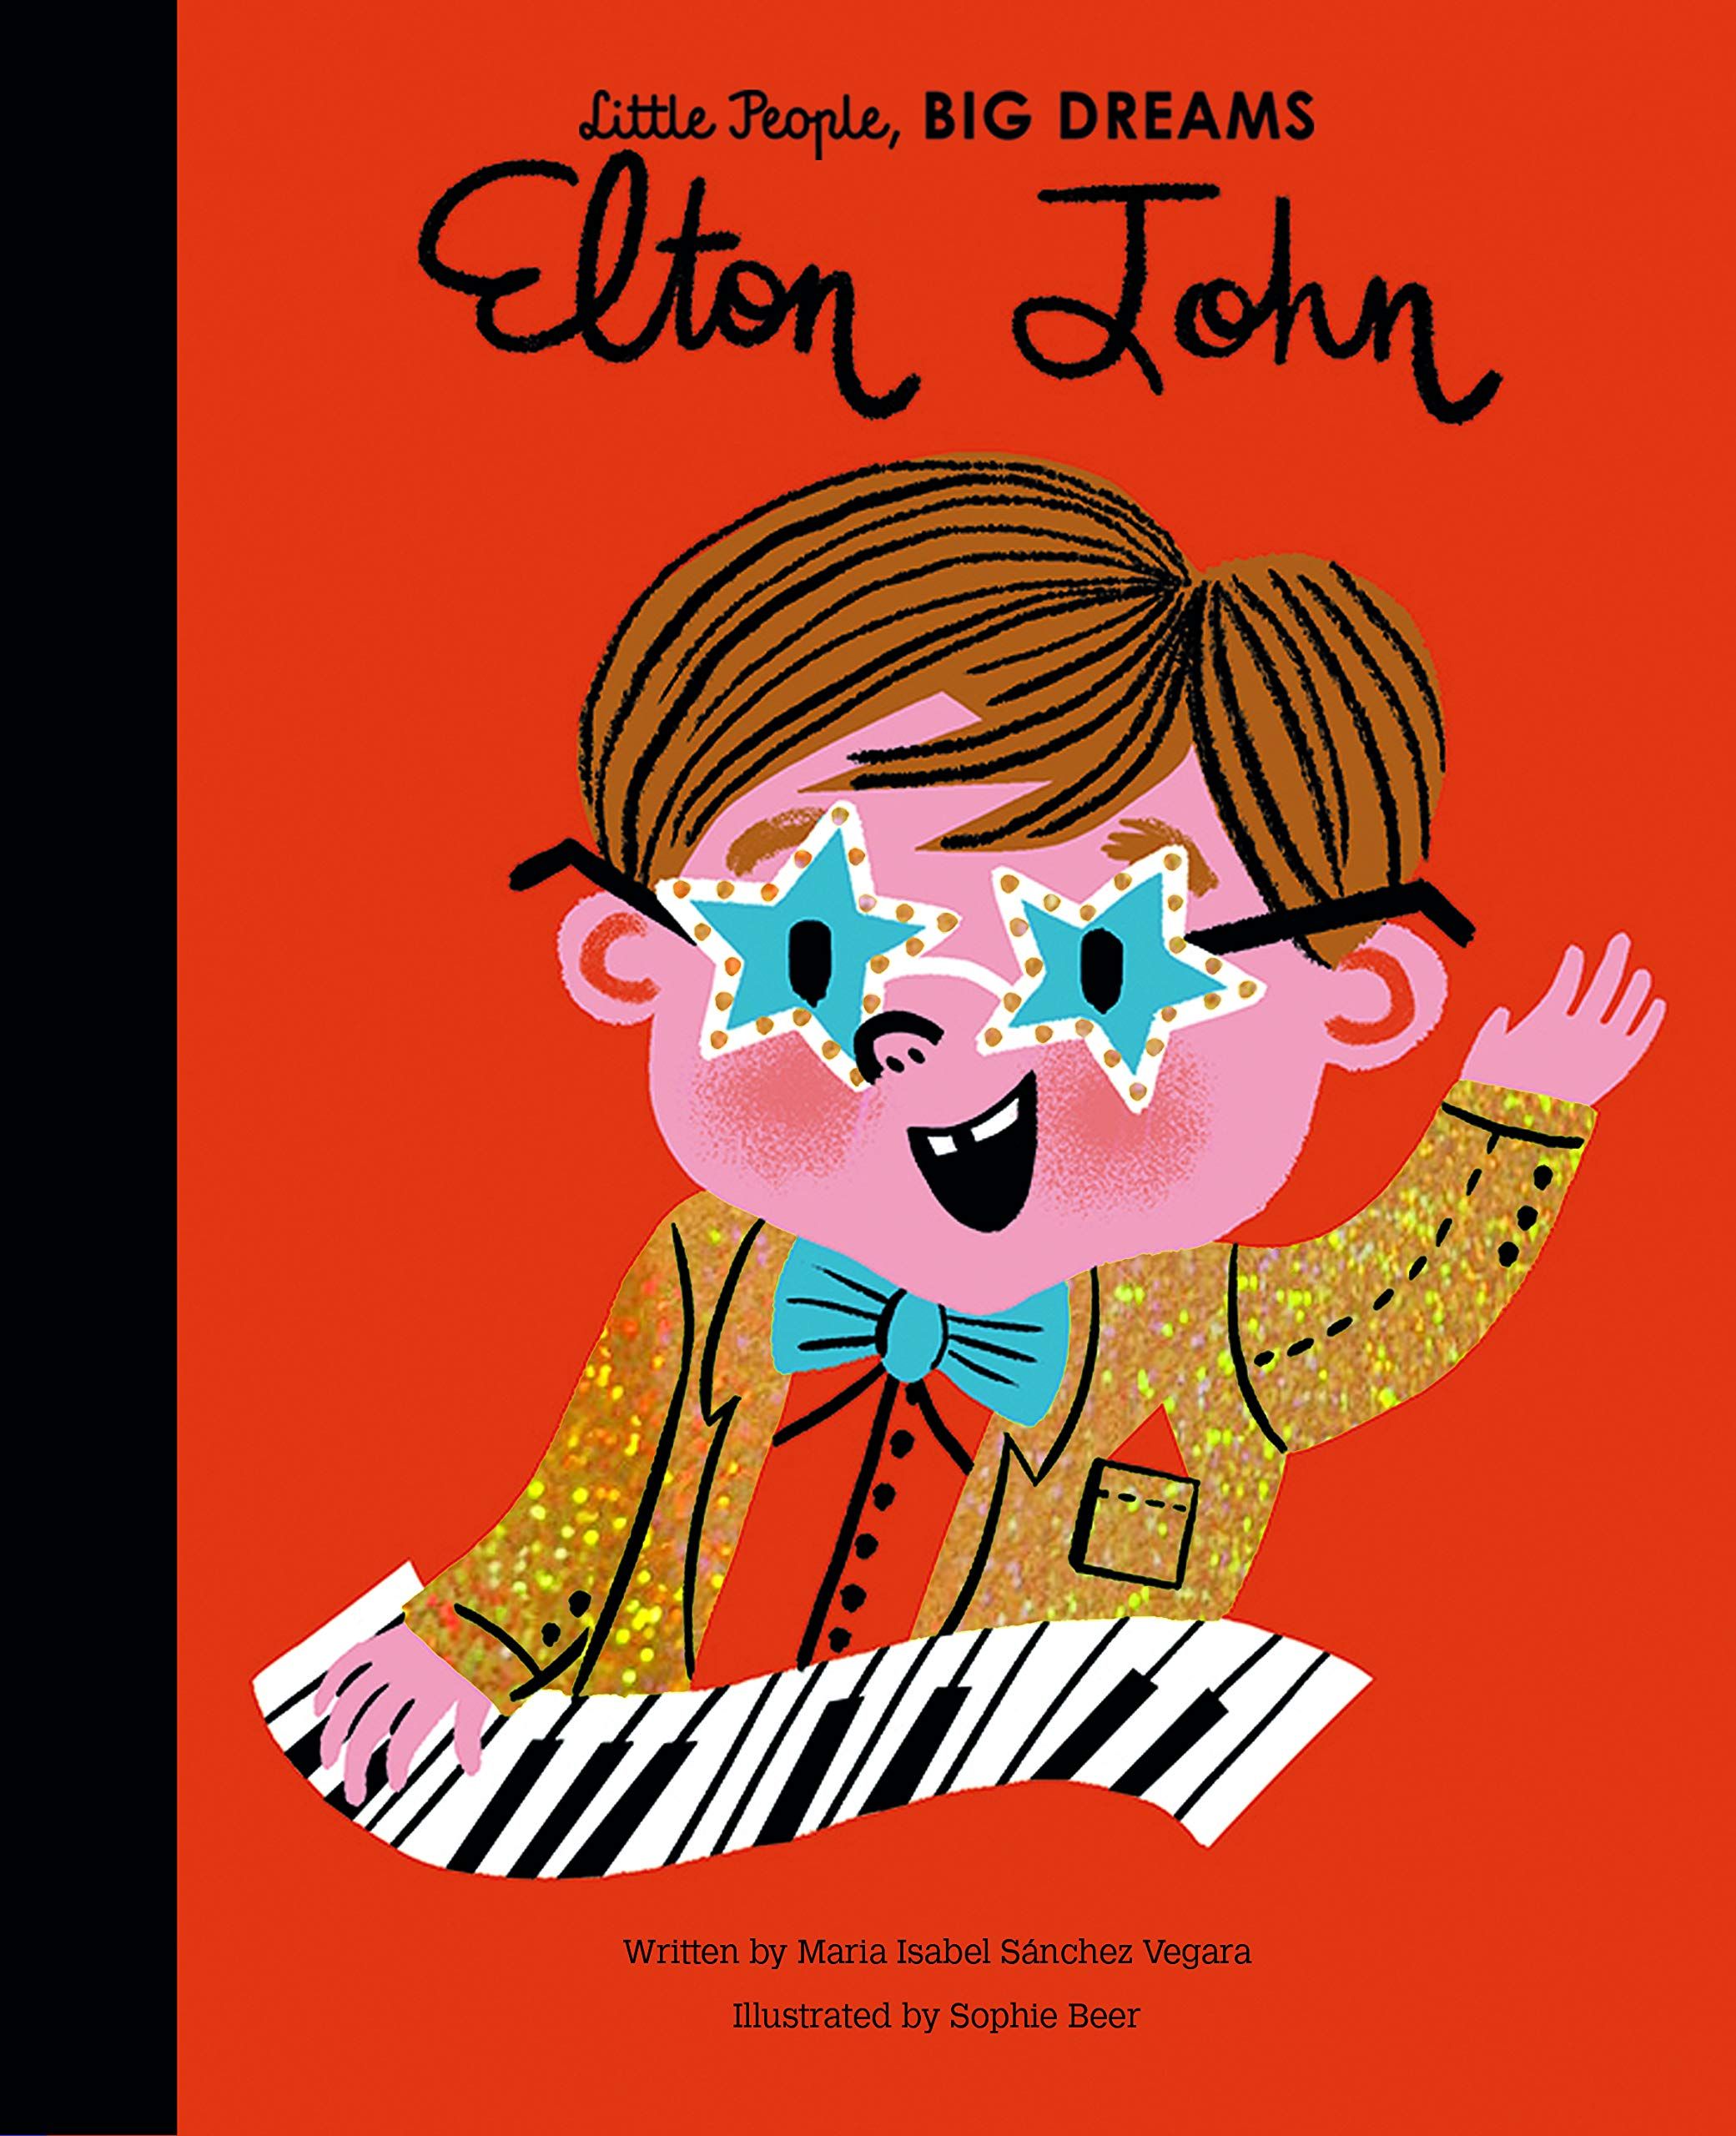 Book cover of Little People, Big Dreams by Elton John